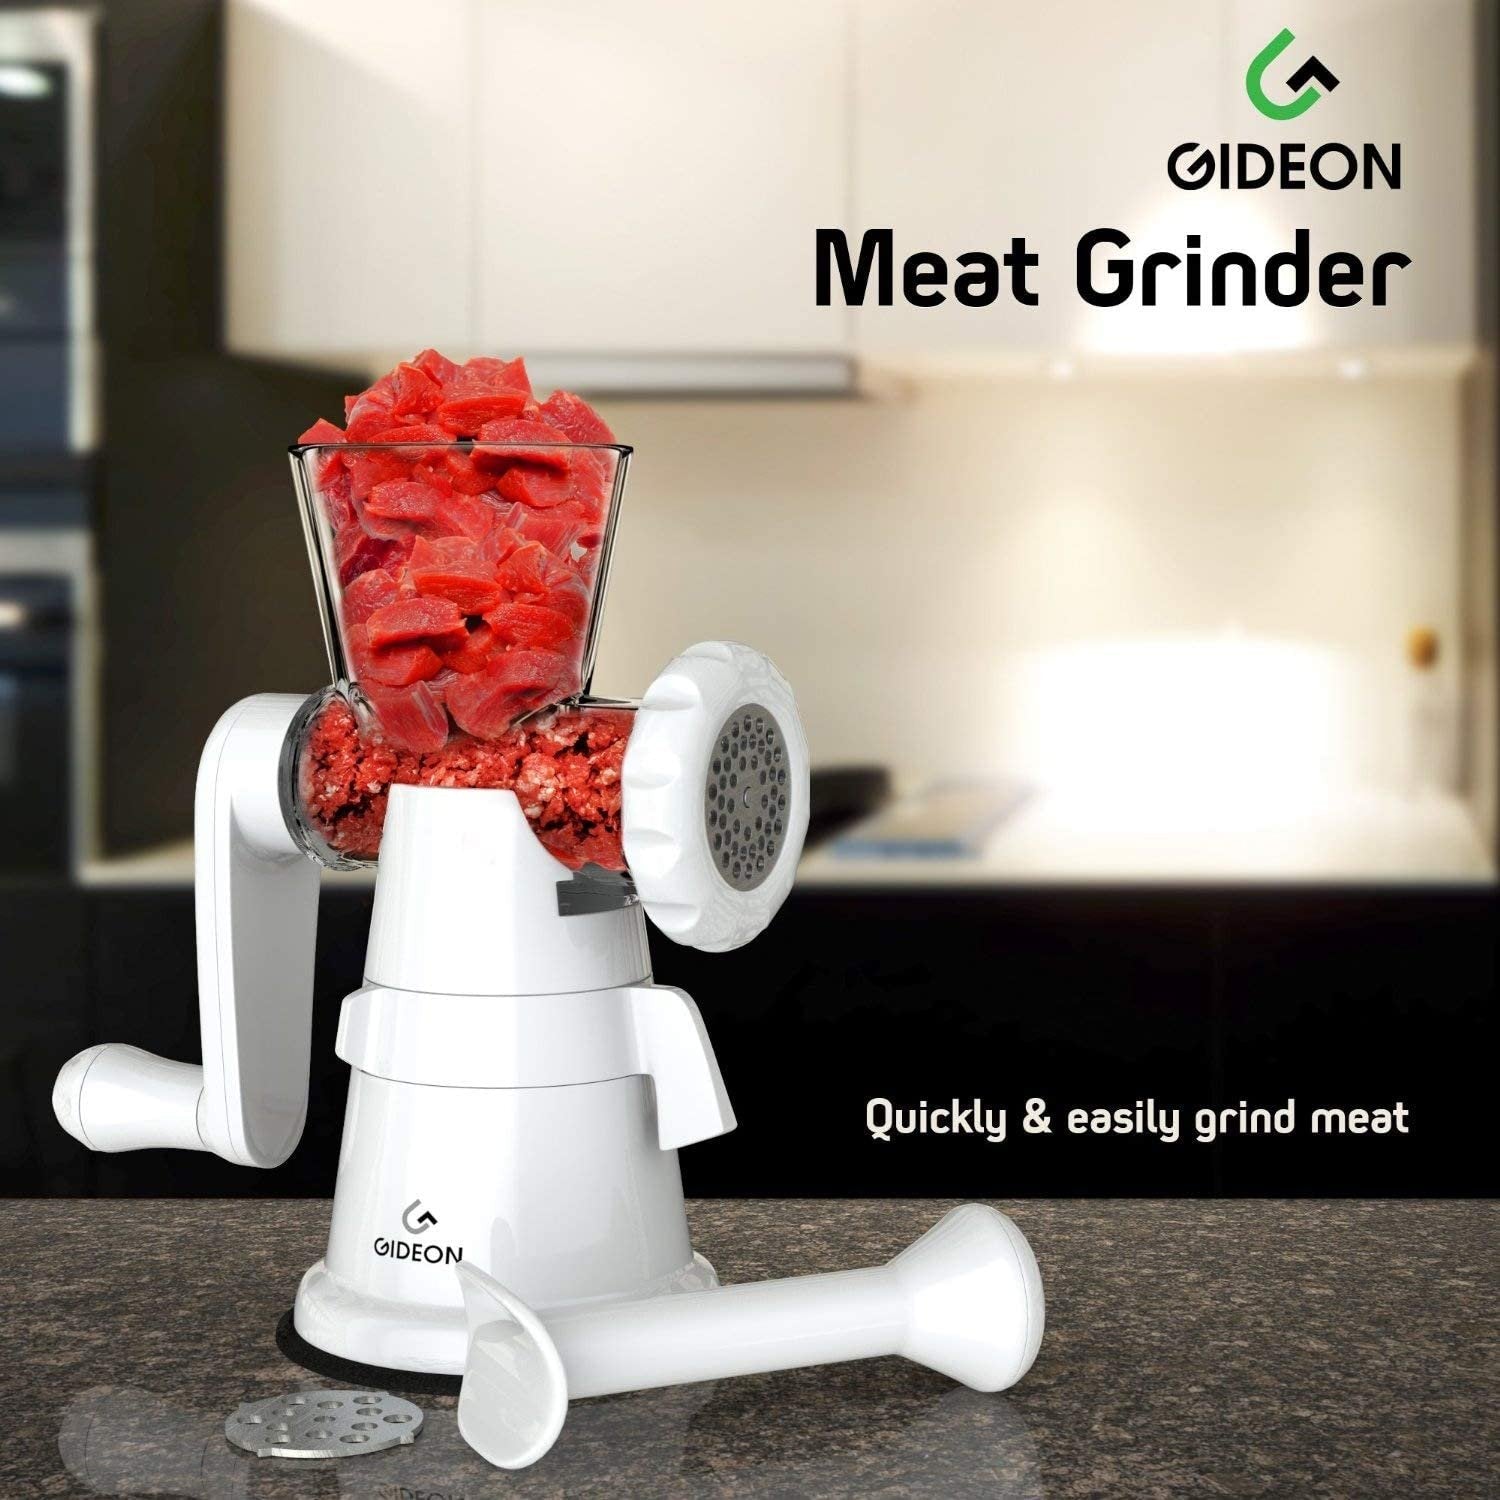 Gideon Manual Meat Grinder - Heavy Duty Stainless Steel Blades - Hand Crank - White - Size Options